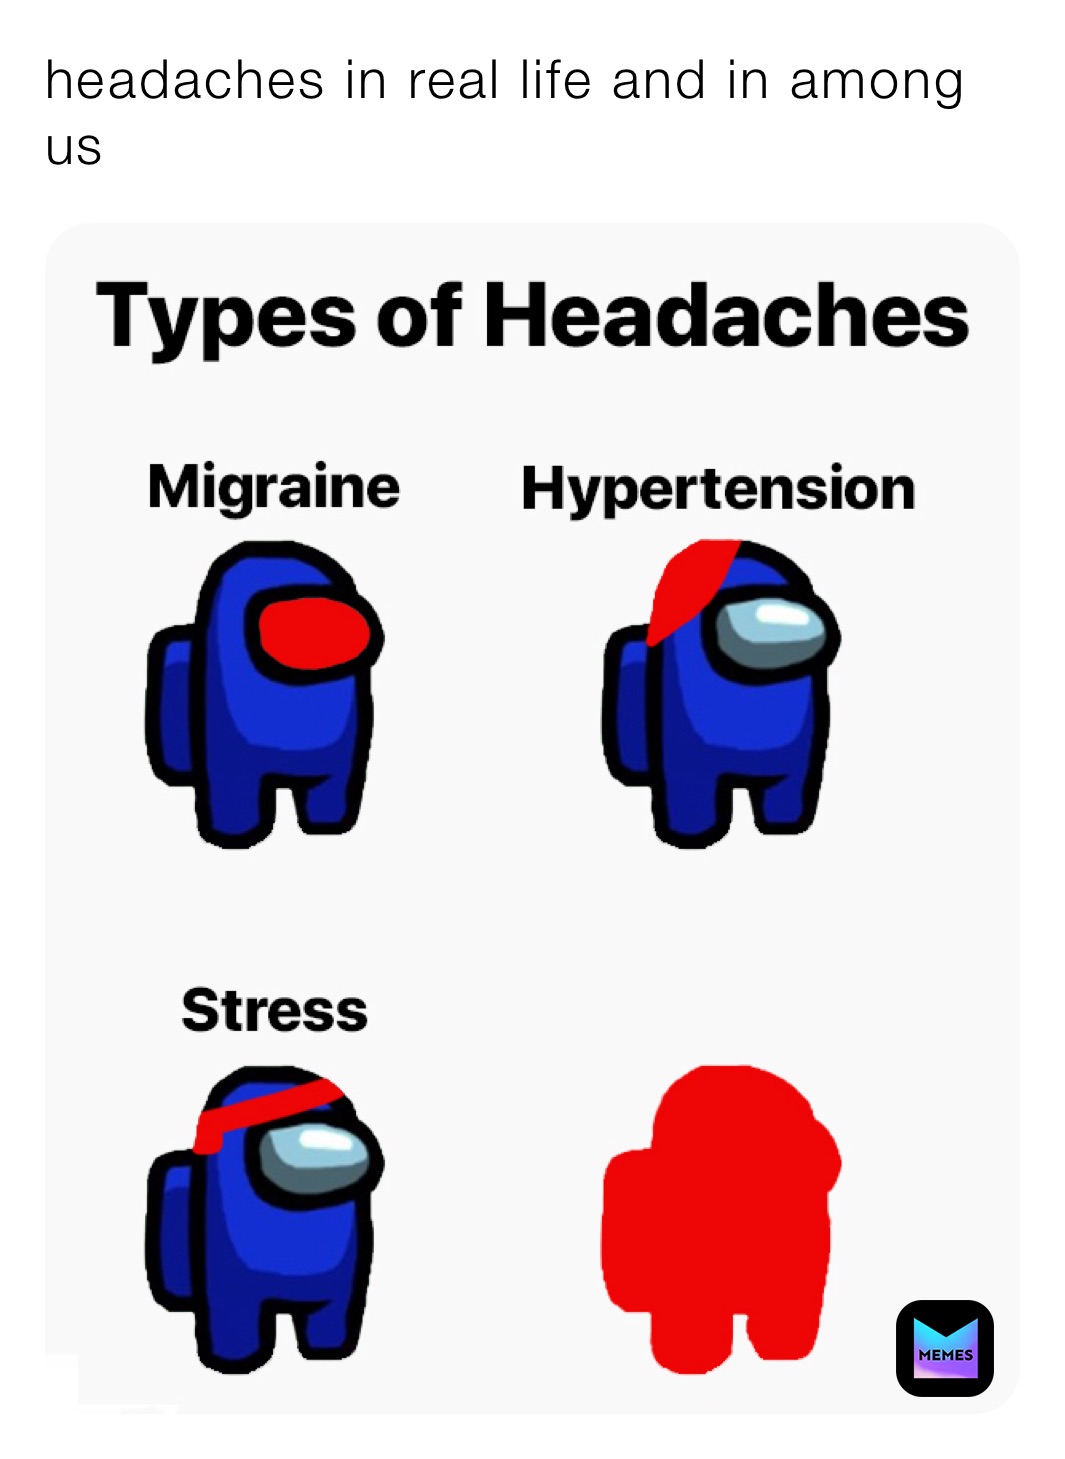 headaches in real life and in among us